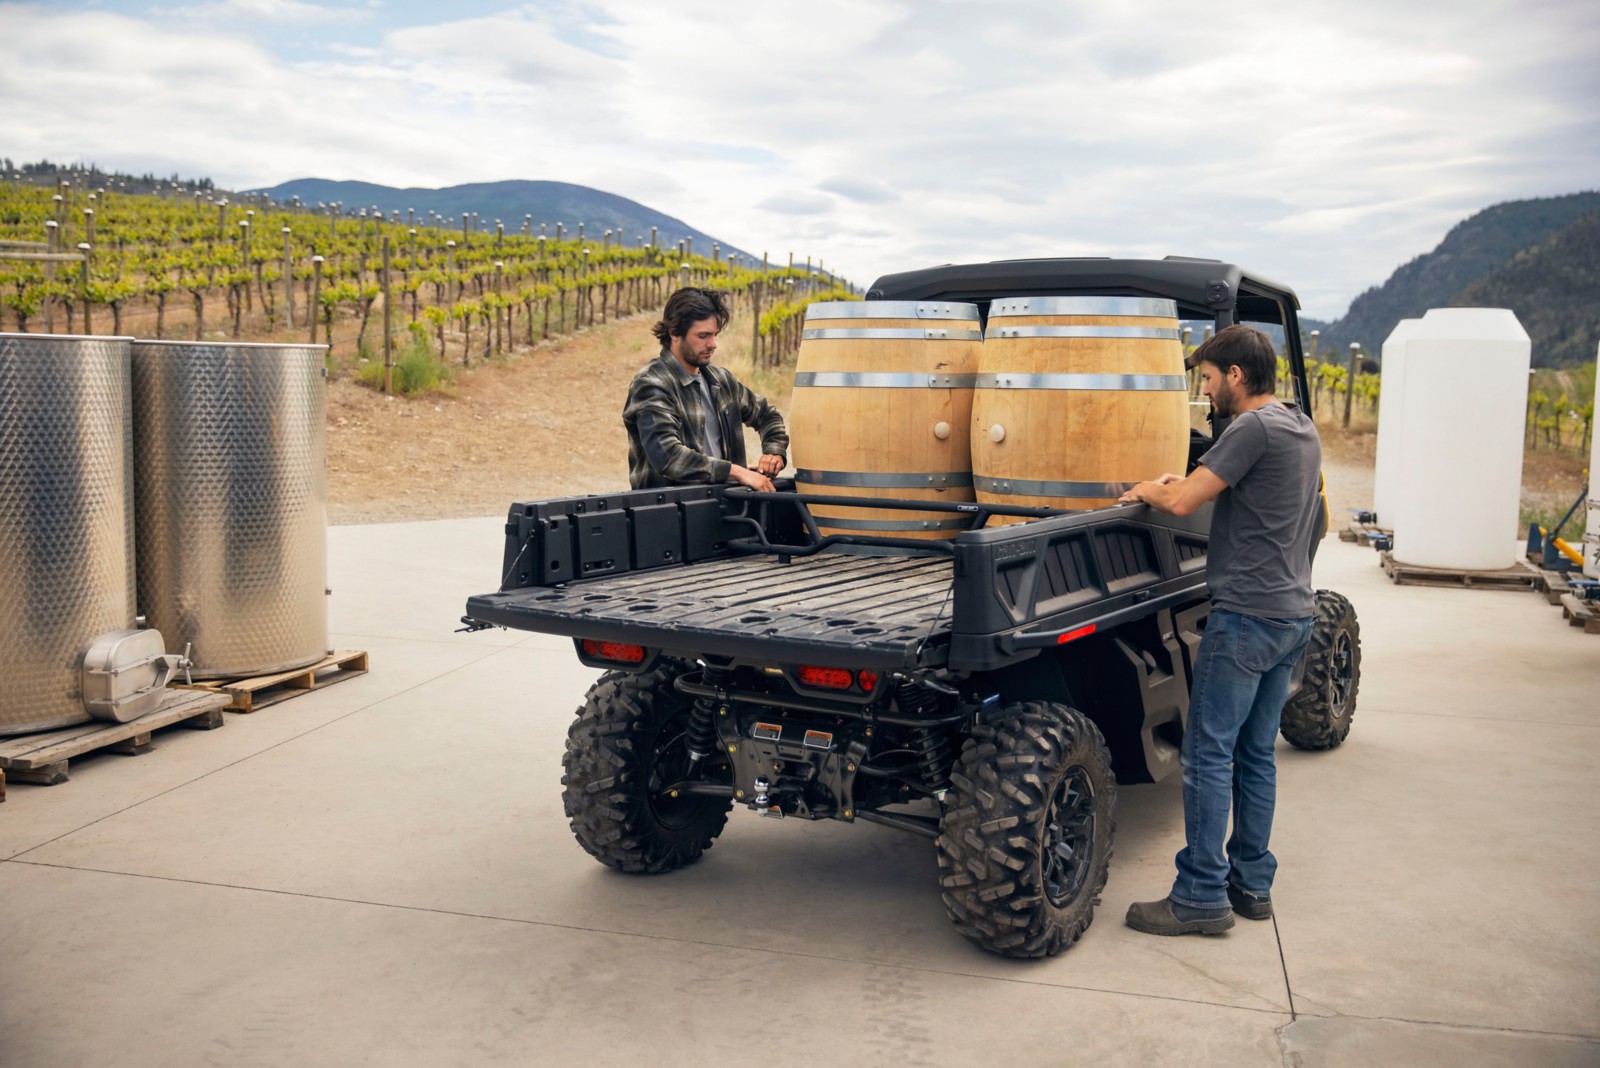 2 men working in a vineyard with their Can-Am vehicle